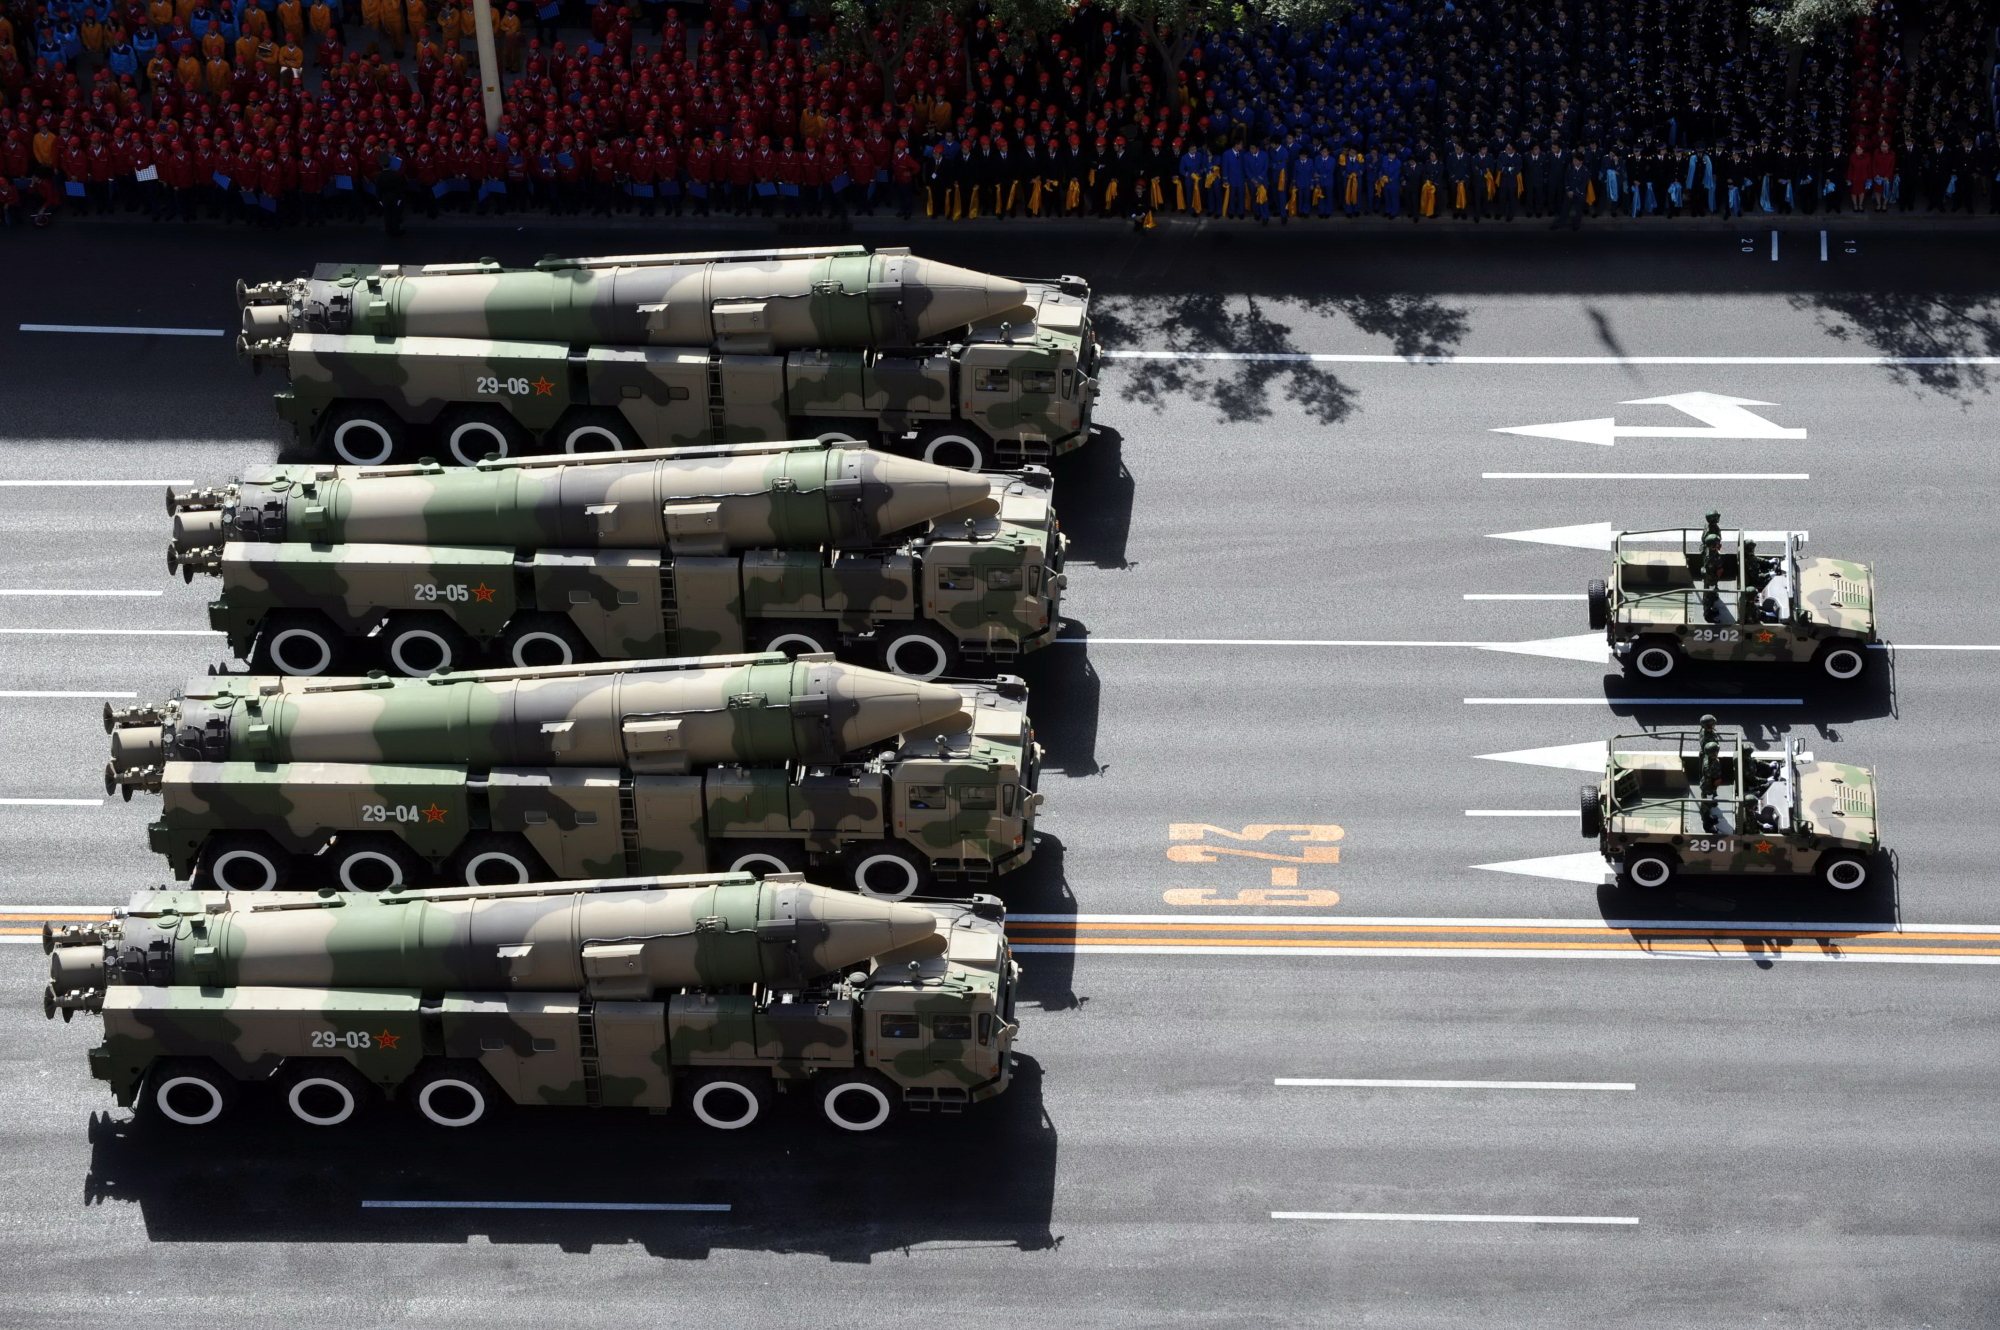 Chinese military vehicles carrying DF-21C medium-range ballistic missiles parade through Beijing's Tiananmen Square during a military parade marking the 60th anniversary of the founding of the Peoples Republic of China in October 2009. | IMAGINECHINA / VIA AP